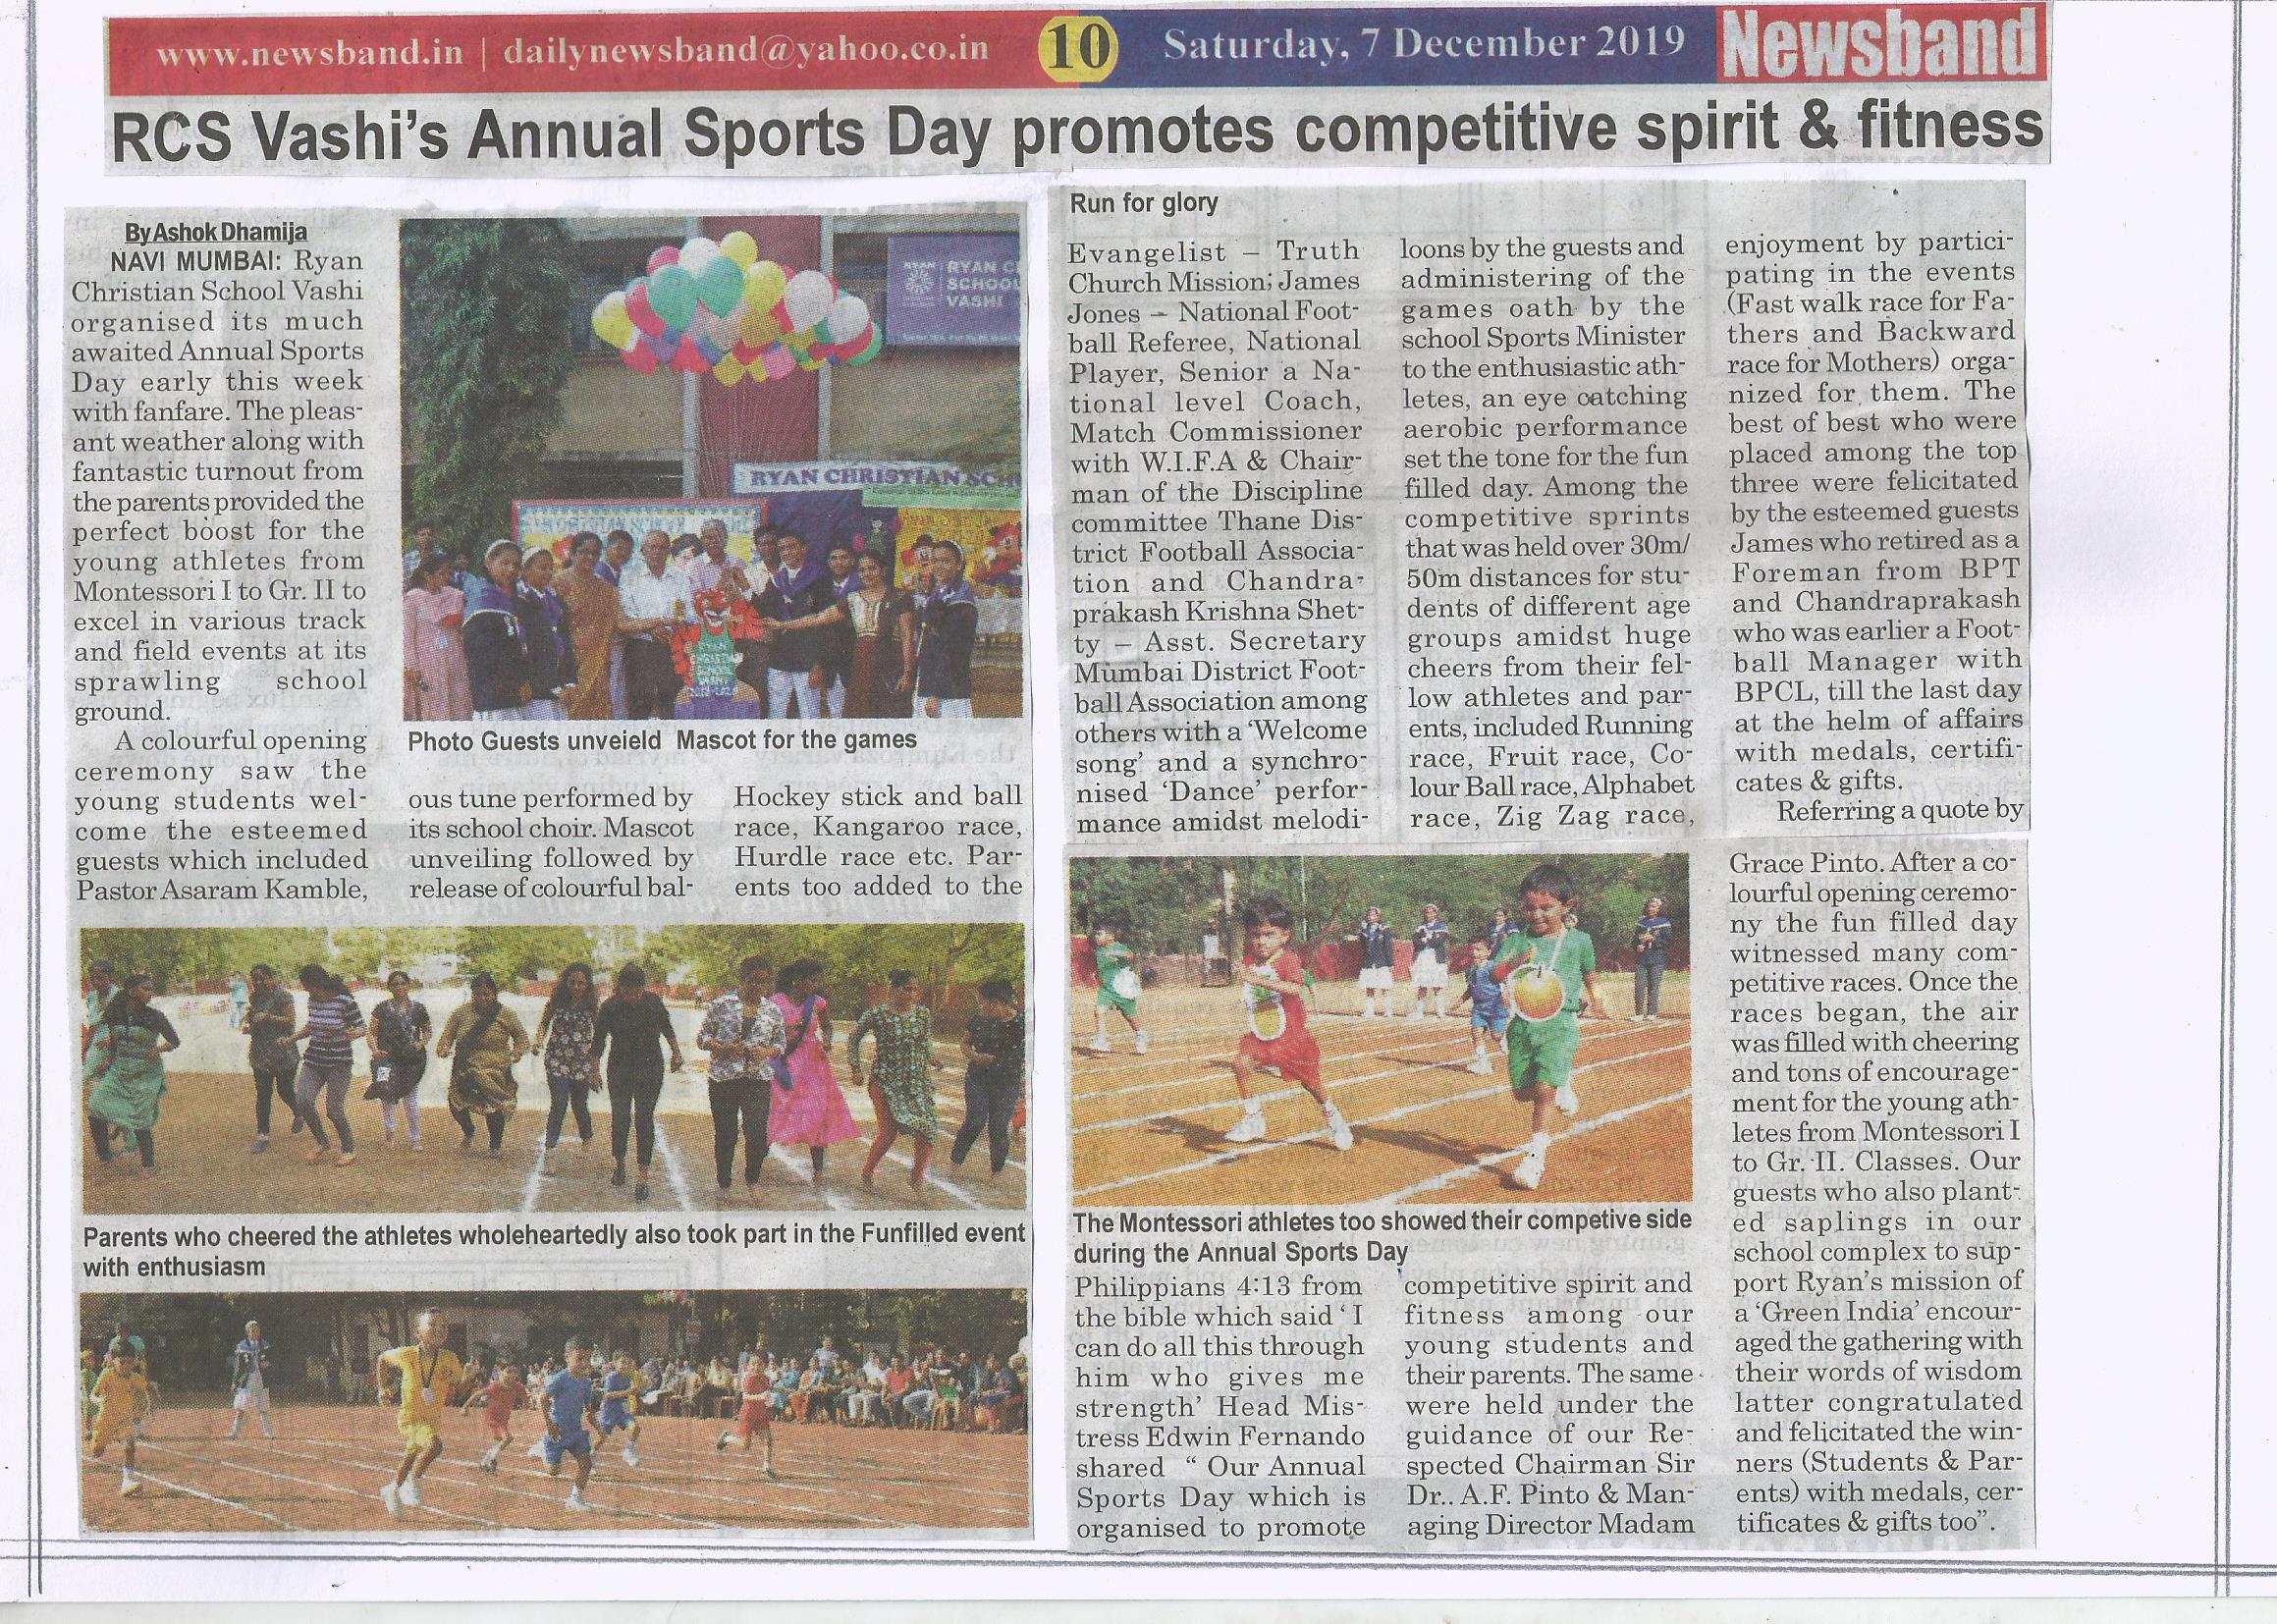 Annual Sports Day was featured in Newsband